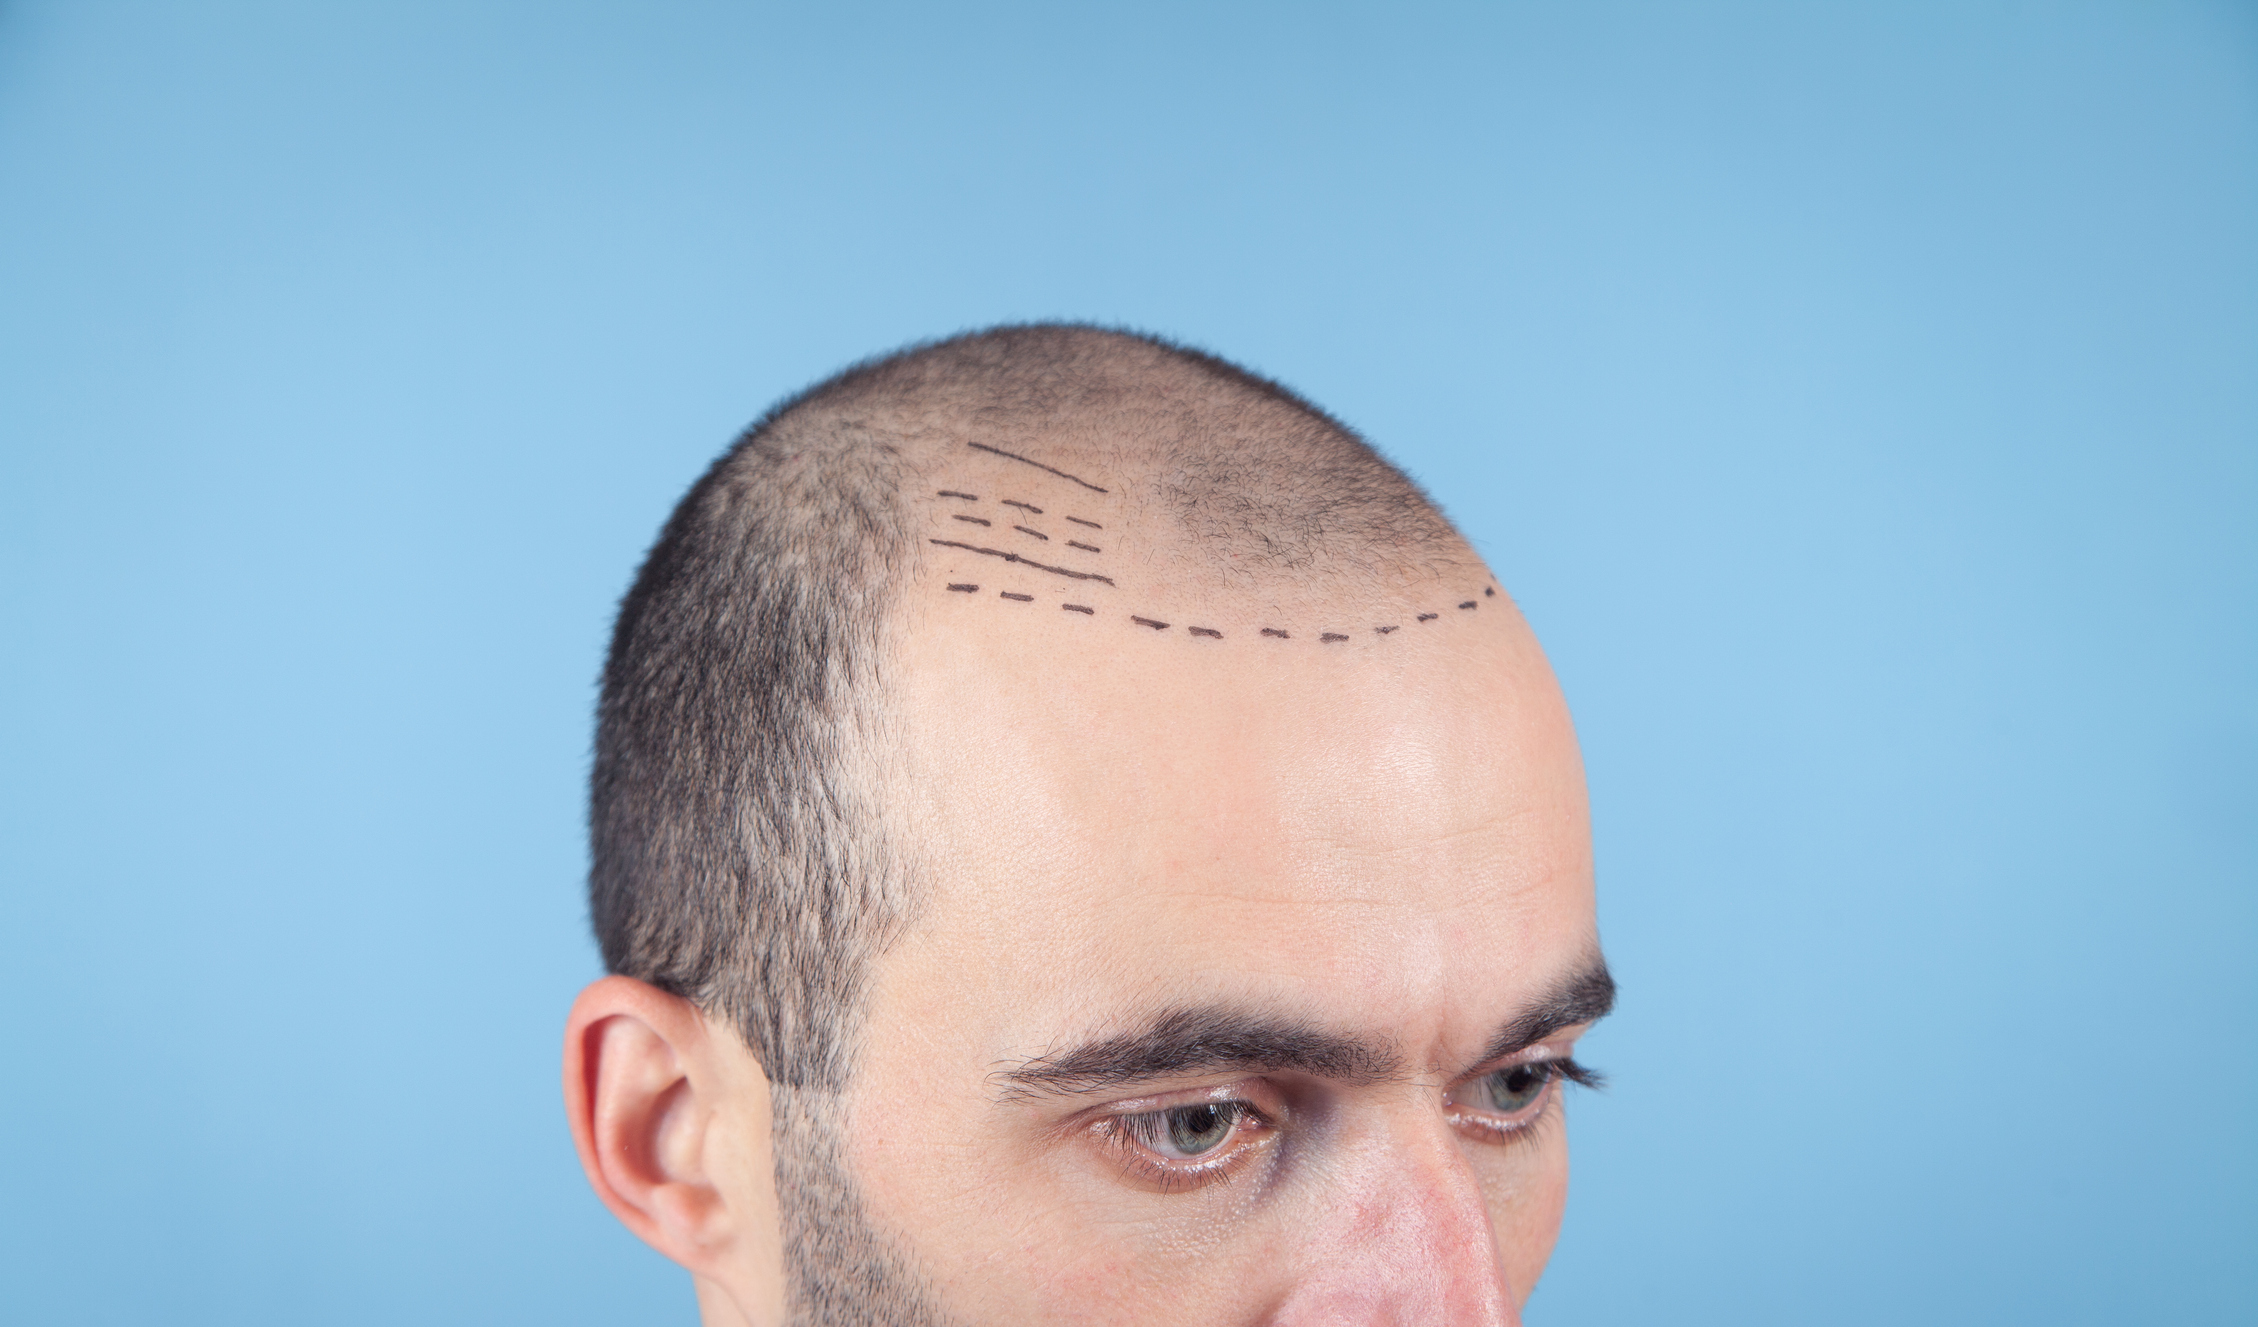 Man gets ready for a hair transplant with scalp markings that indicate hair transplant location.